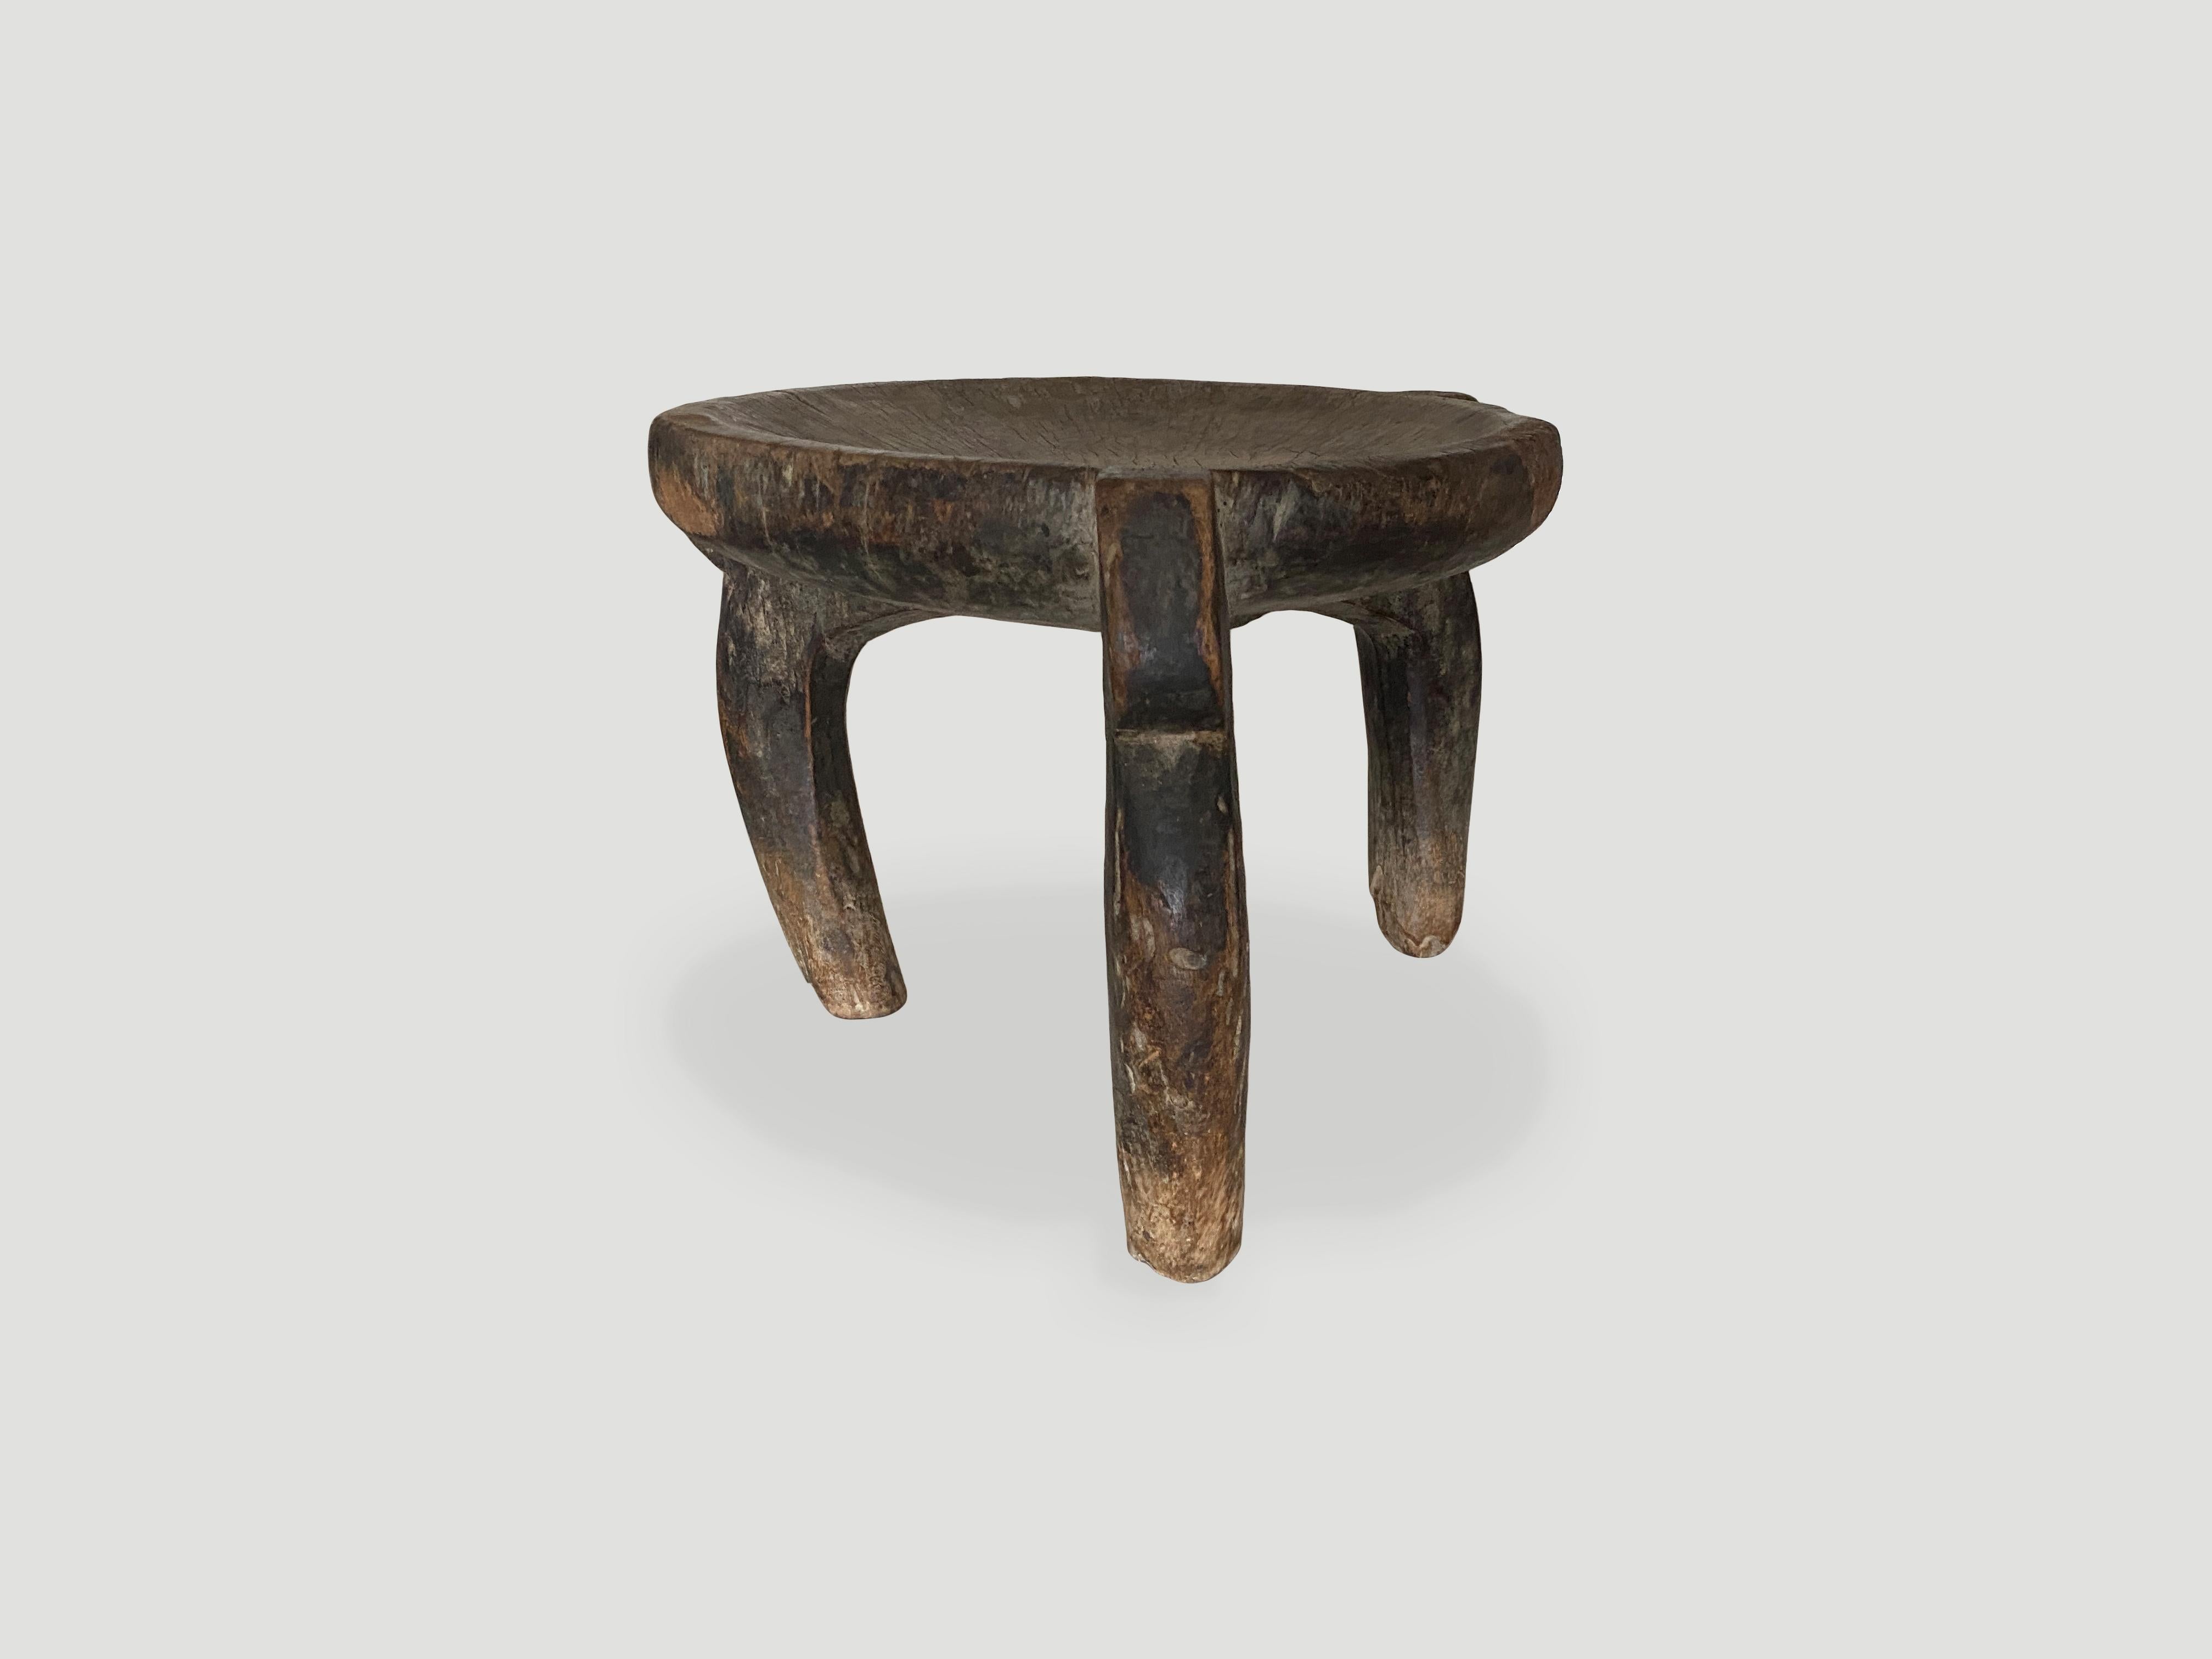 Wood Andrianna Shamaris Antique African Stool, Side Table or Bowl For Sale